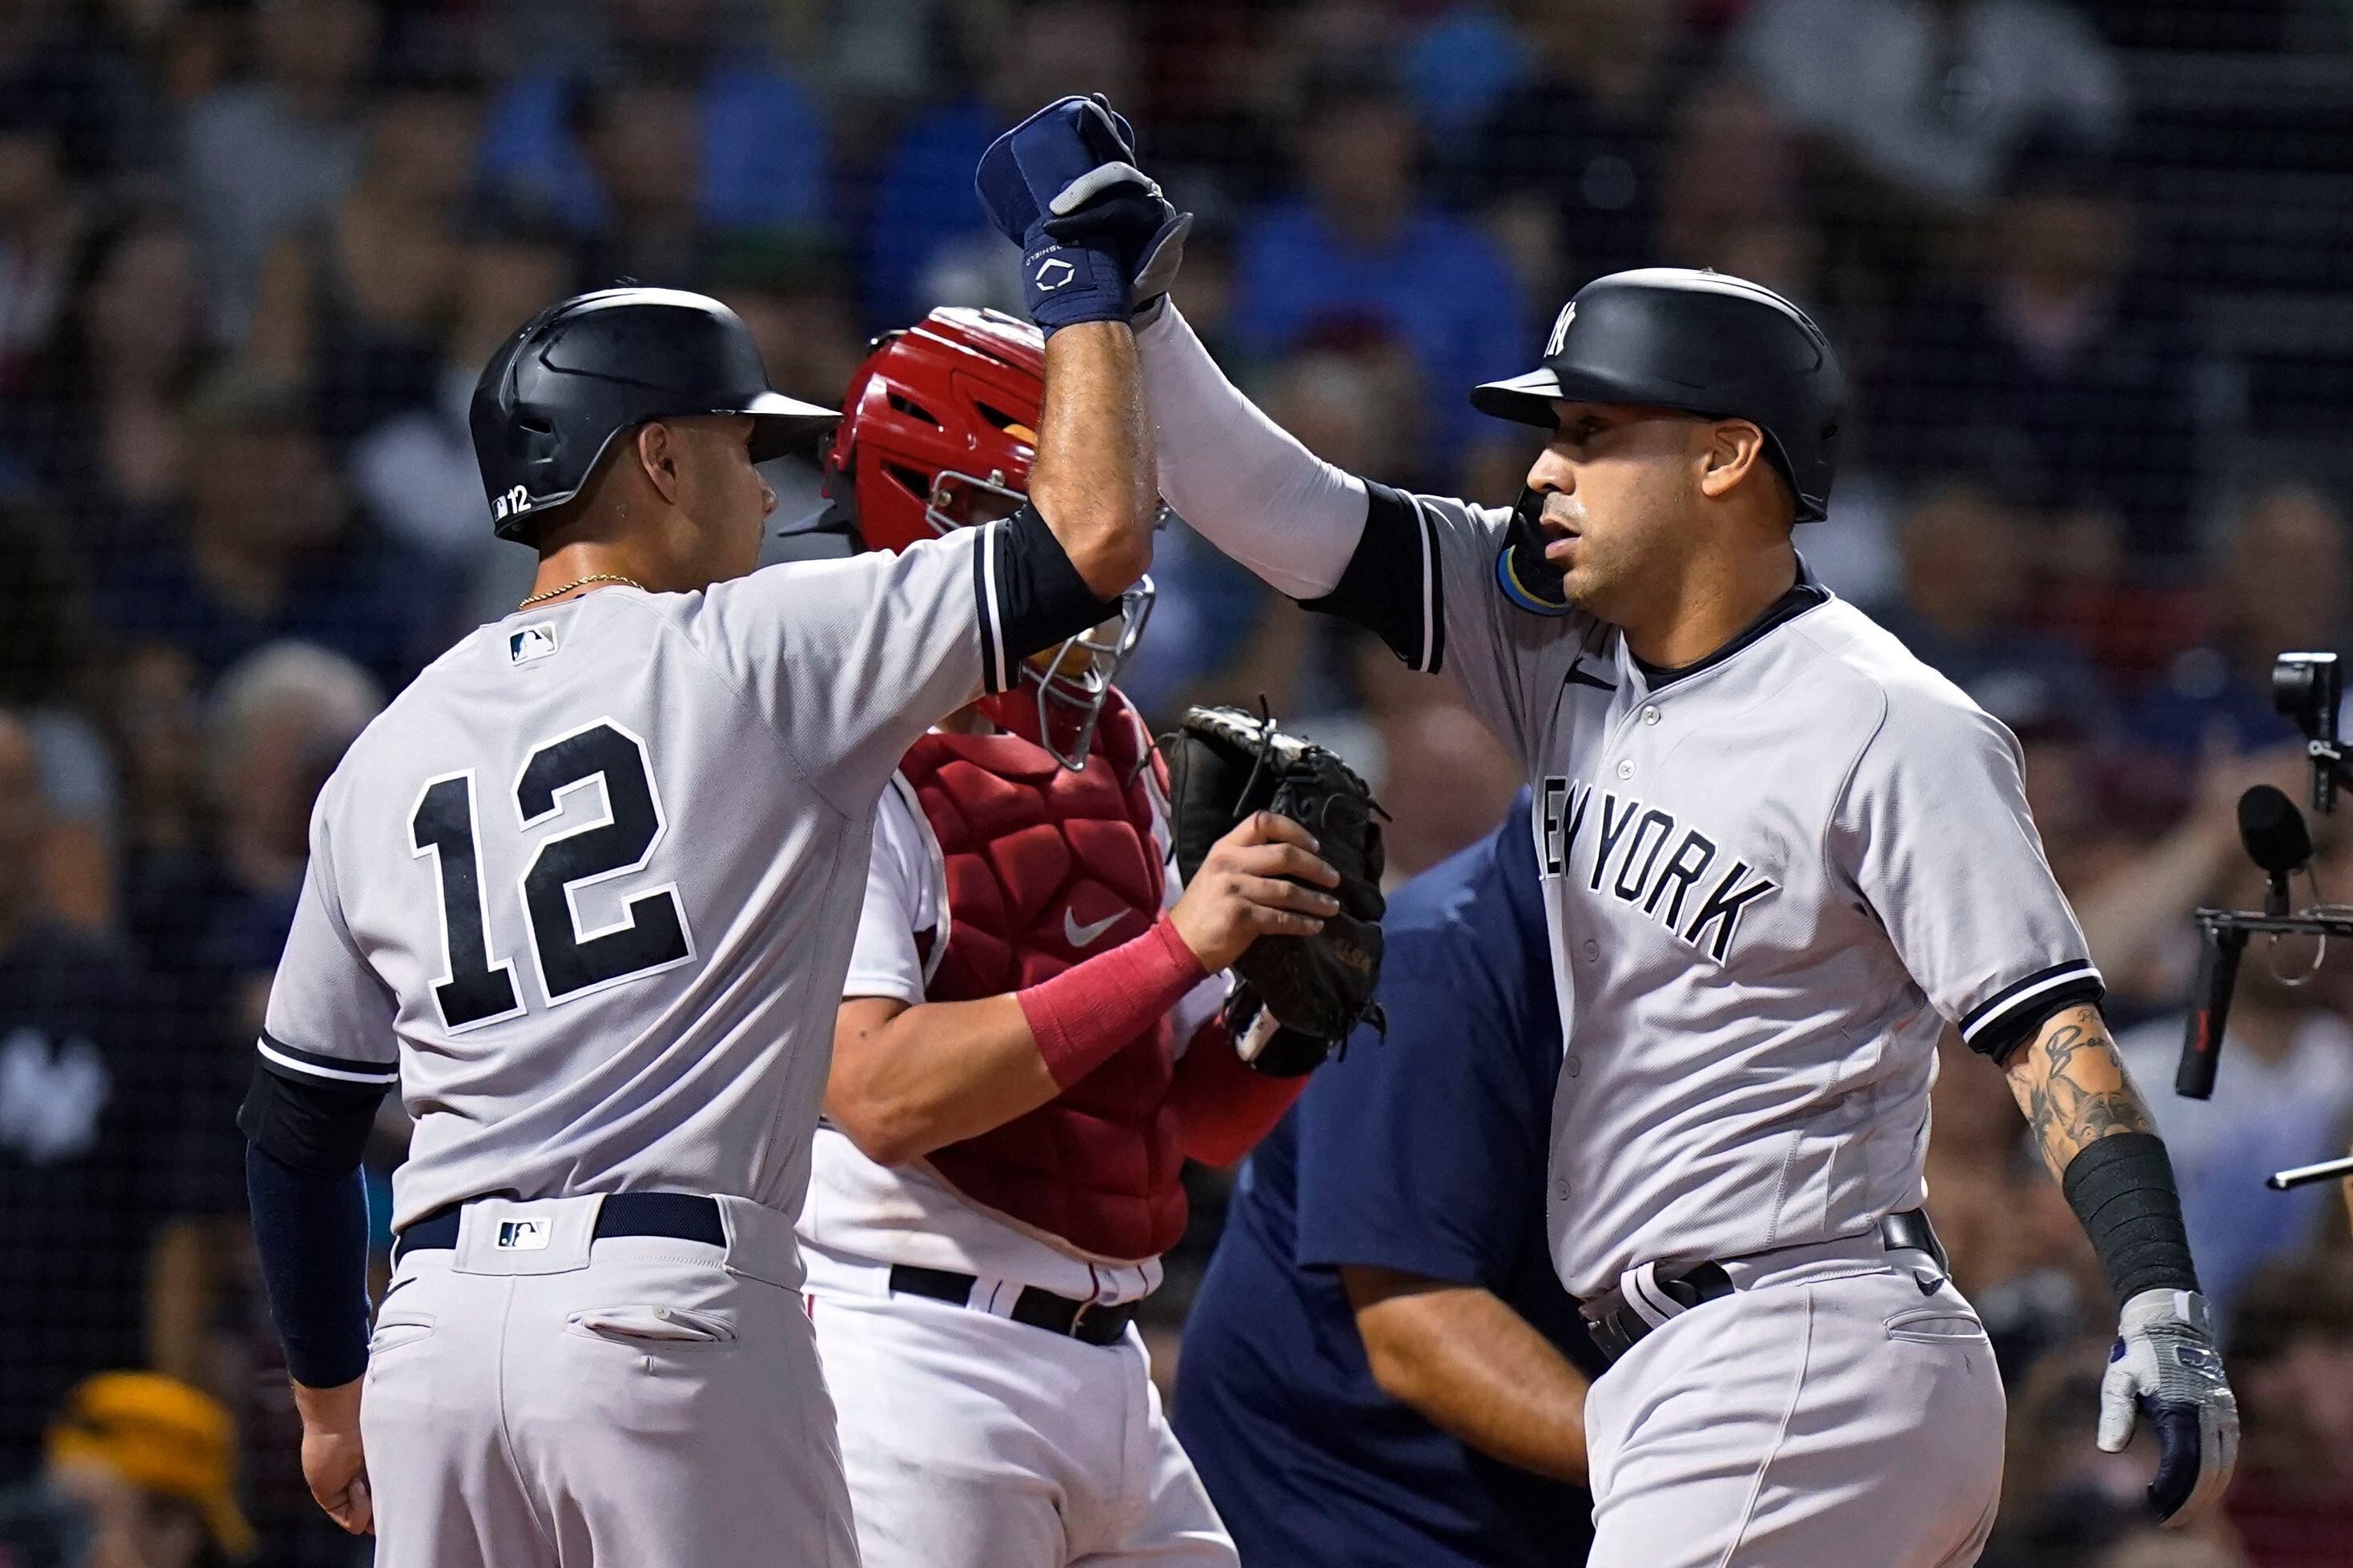 Judge homers twice to reach 57, Yanks beat Sox 7-6 in 10 - What's